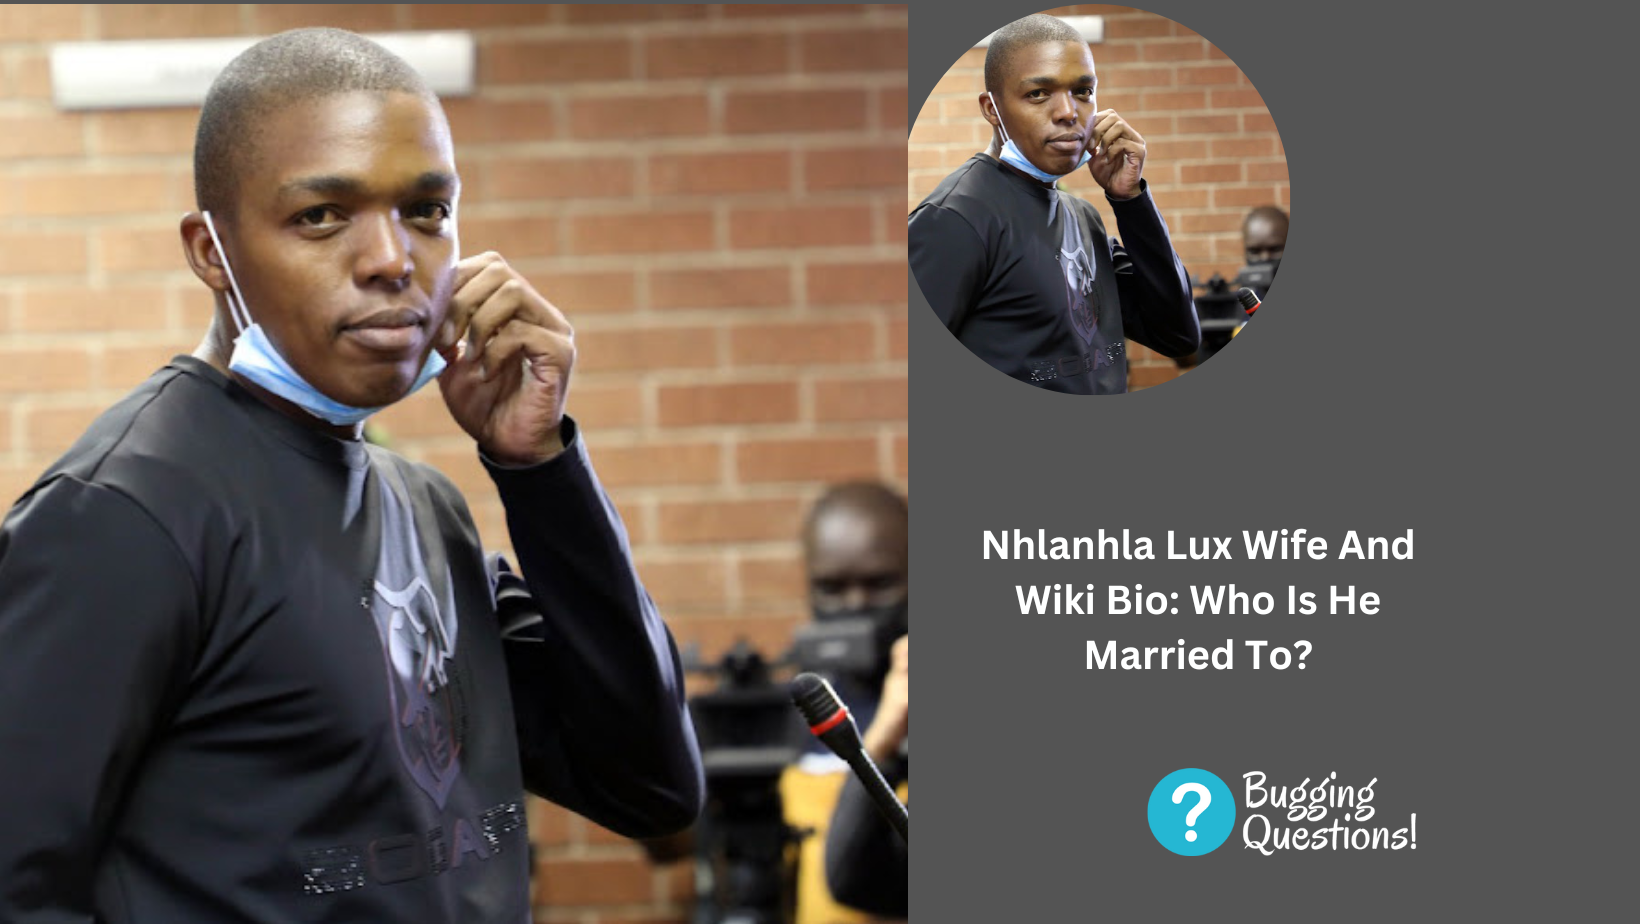 Nhlanhla Lux Wife And Wiki Bio: Who Is He Married To?